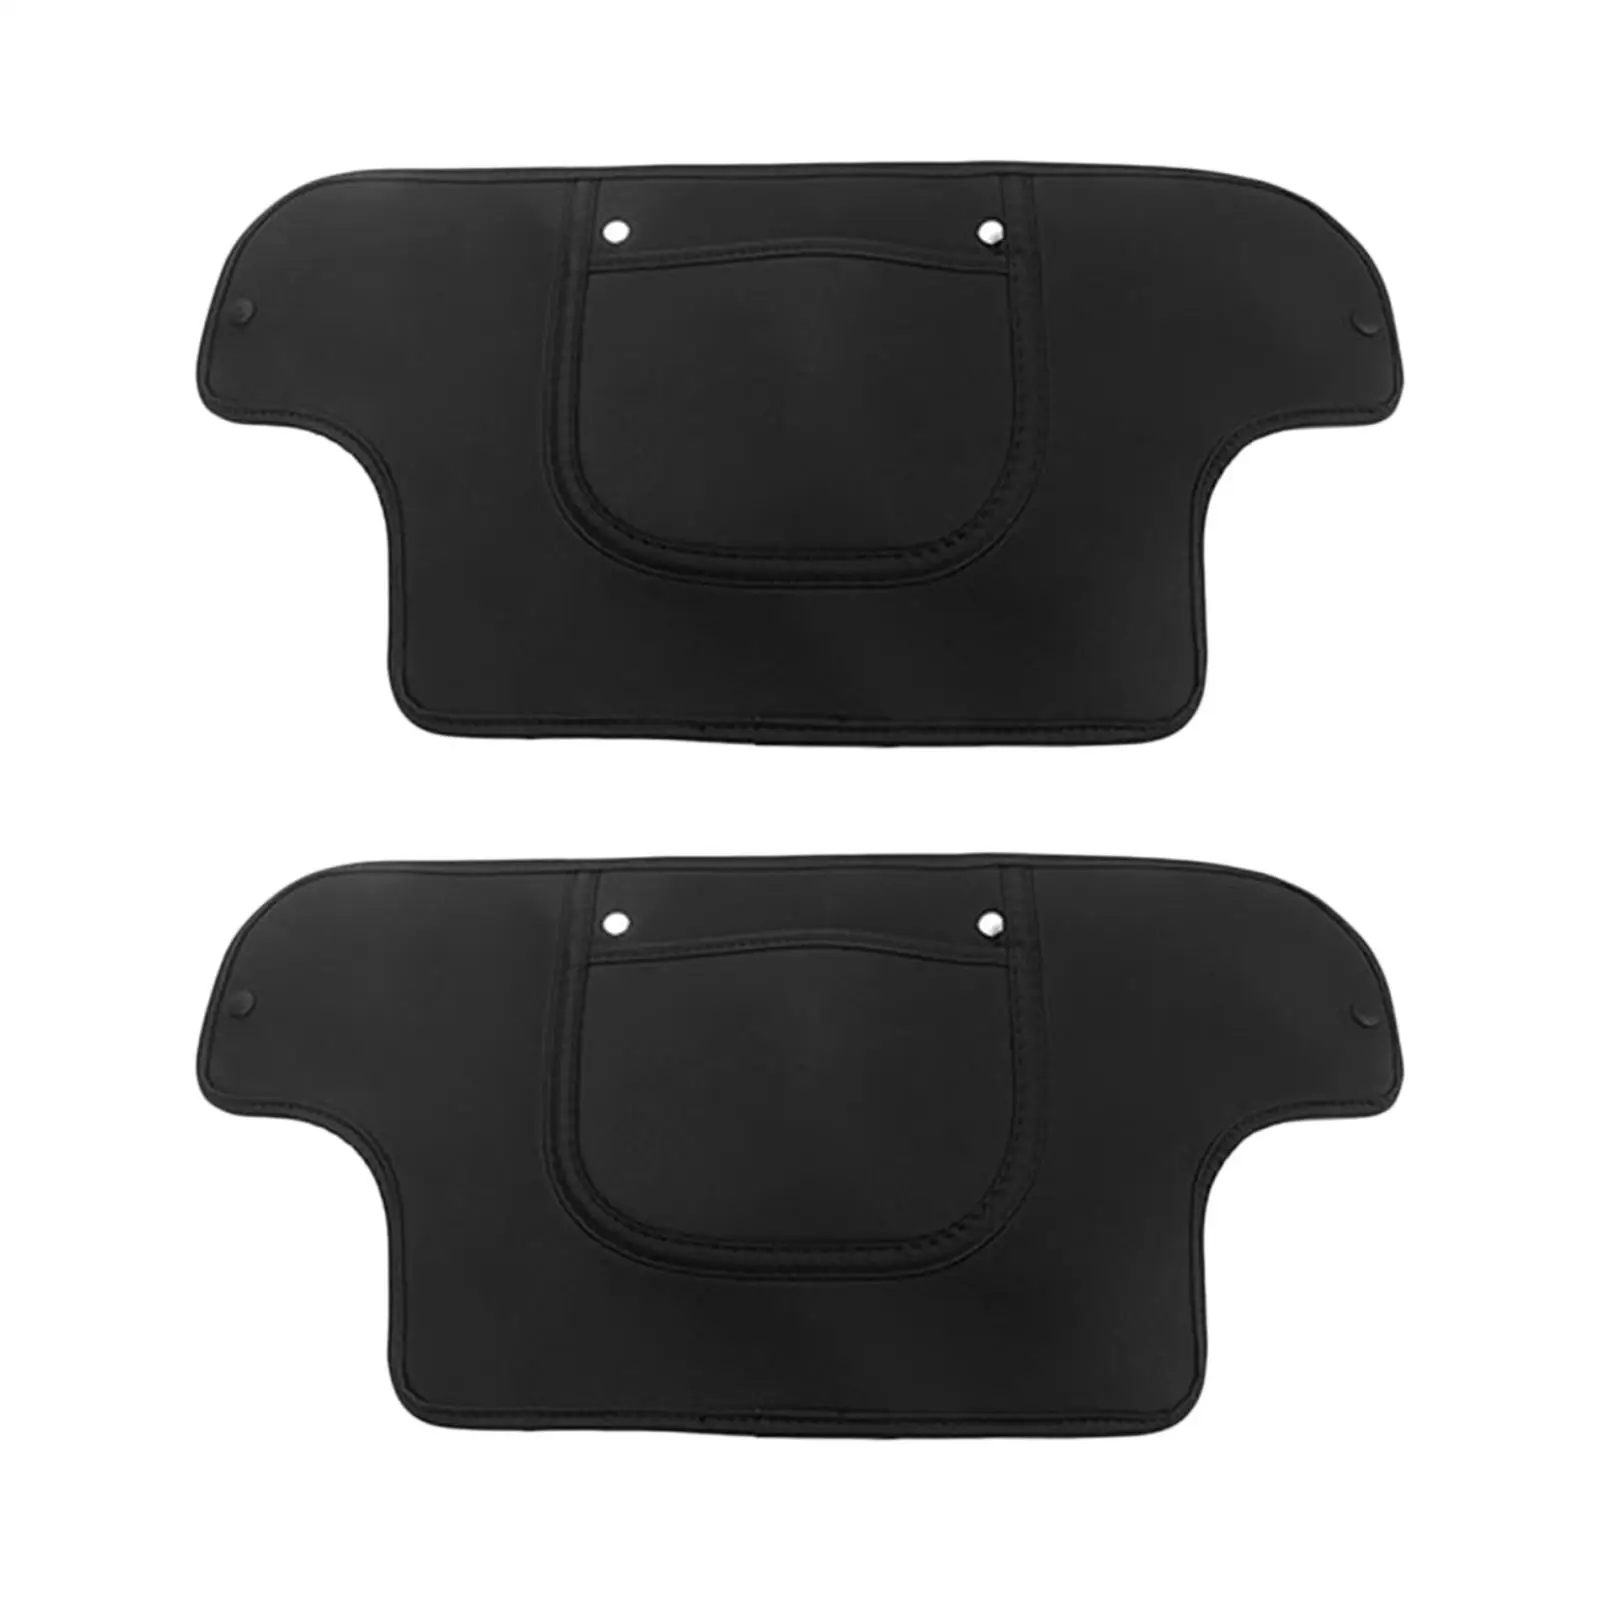 For Tesla 2021 Model 3 Model Y Car Seat Anti Kick Pad Trim Protector Cover interior Anti Dirty LeatherDecoration Accessories